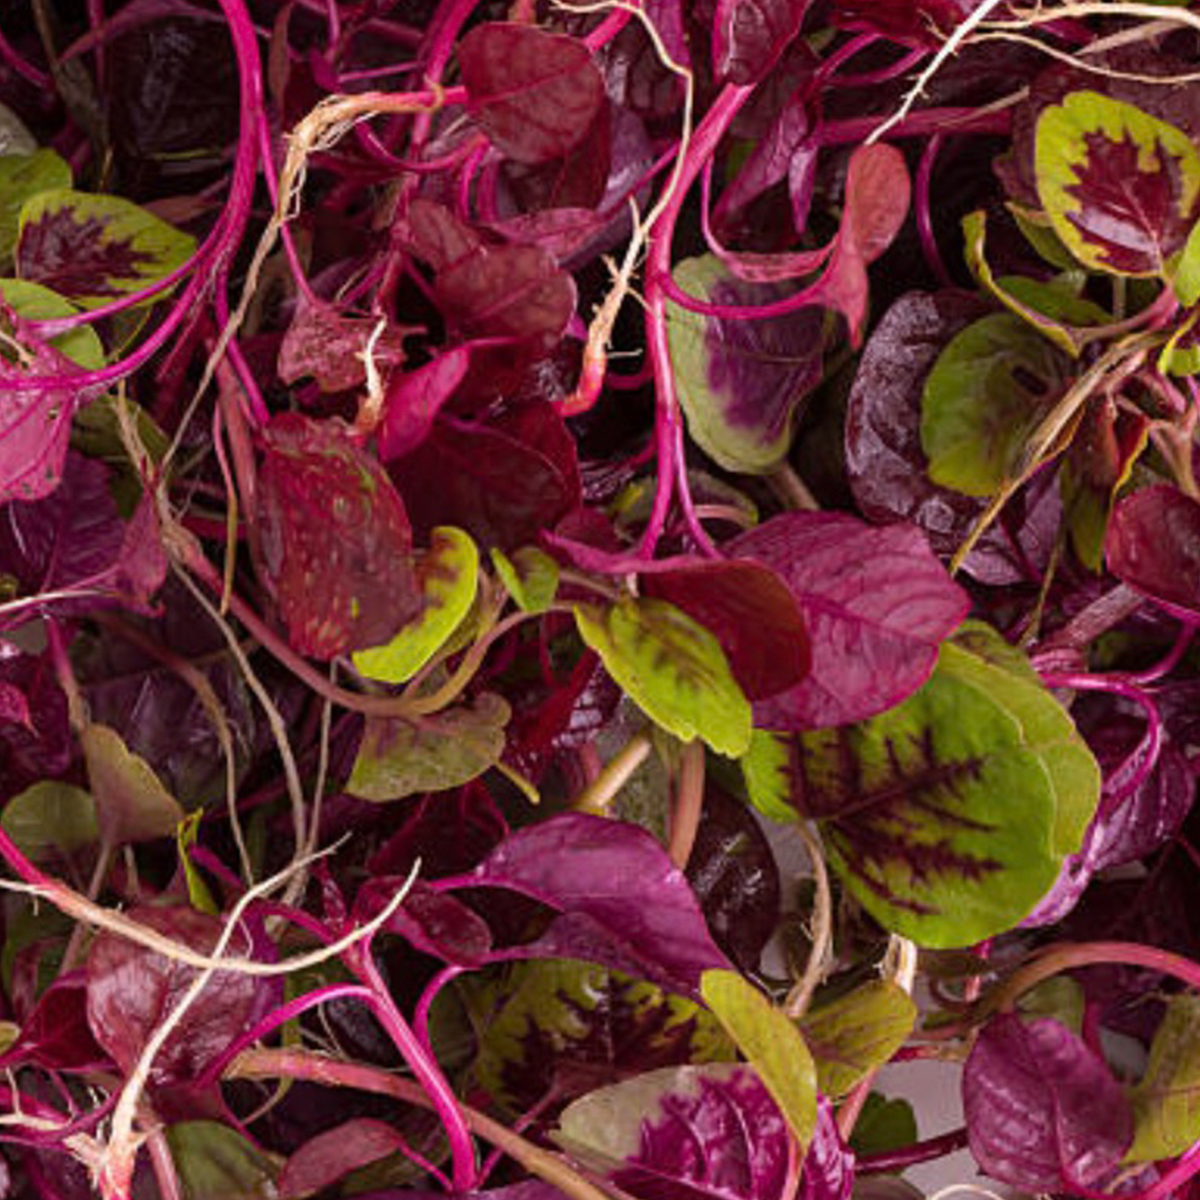 Red spinach leaf extract